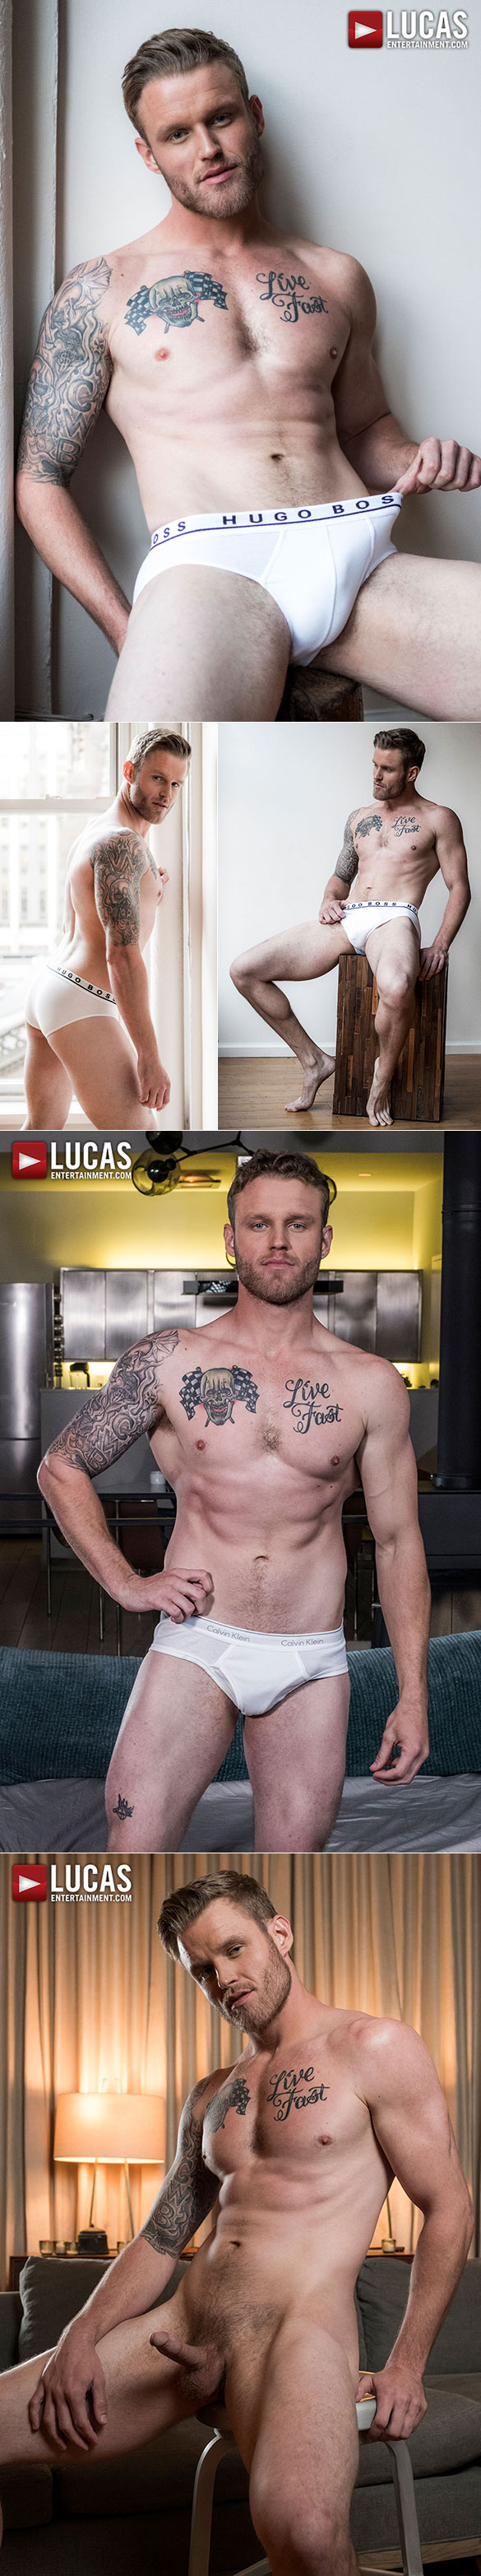 Lucas Entertainment: Shawn Reeve takes Andre Donovan and Bama Romello's big dicks raw